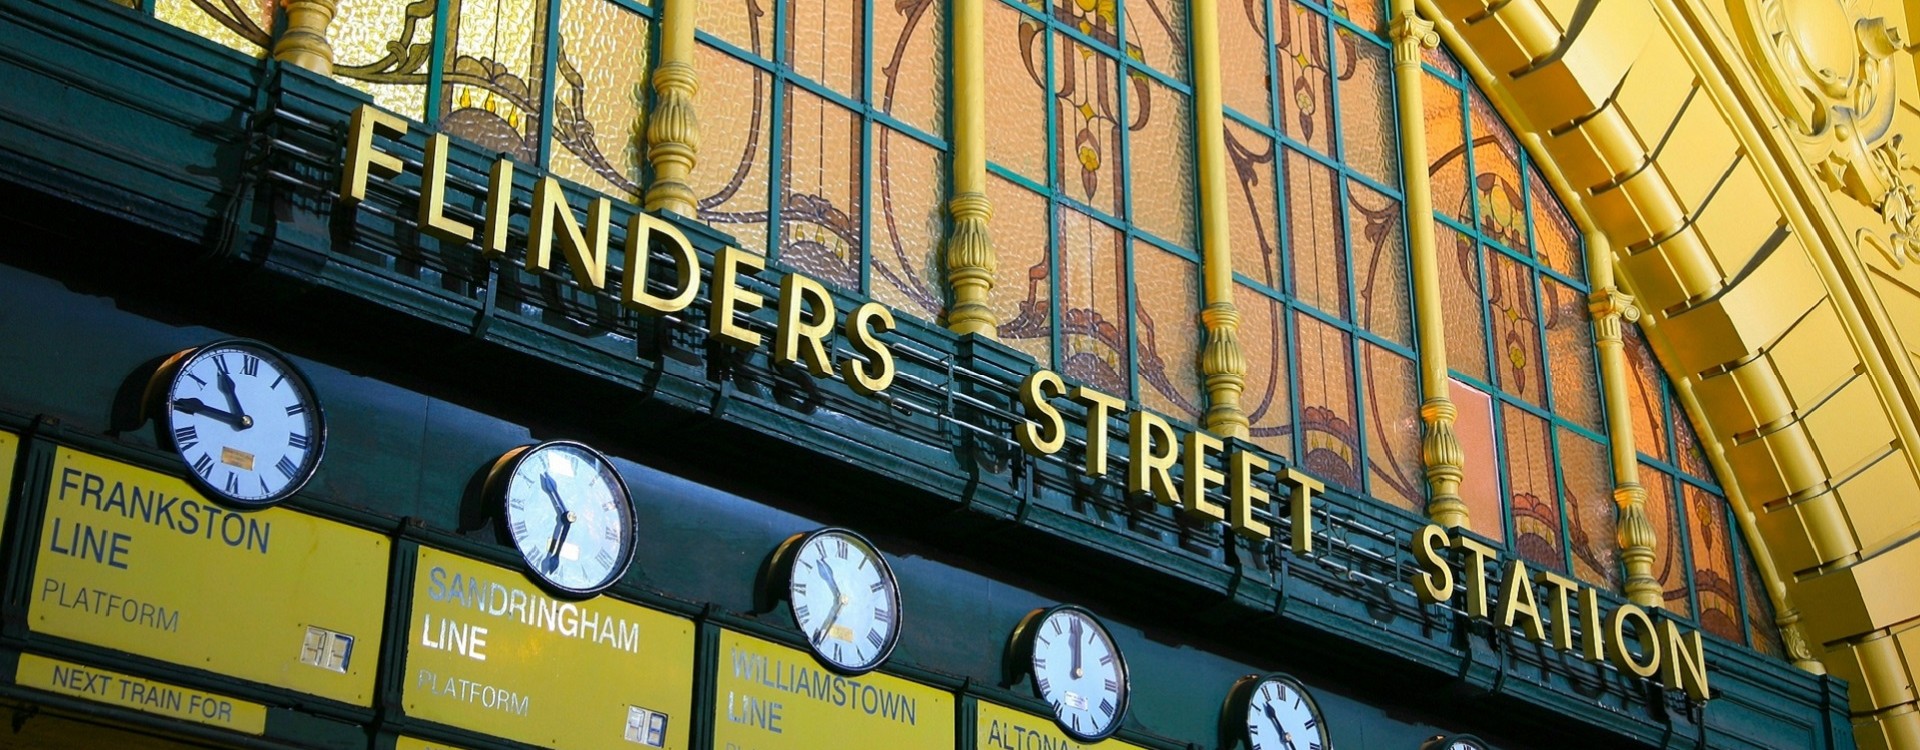 “I’ll meet you under the clocks” – Flinders St station is the iconic landmark in Melbourne’s CBD